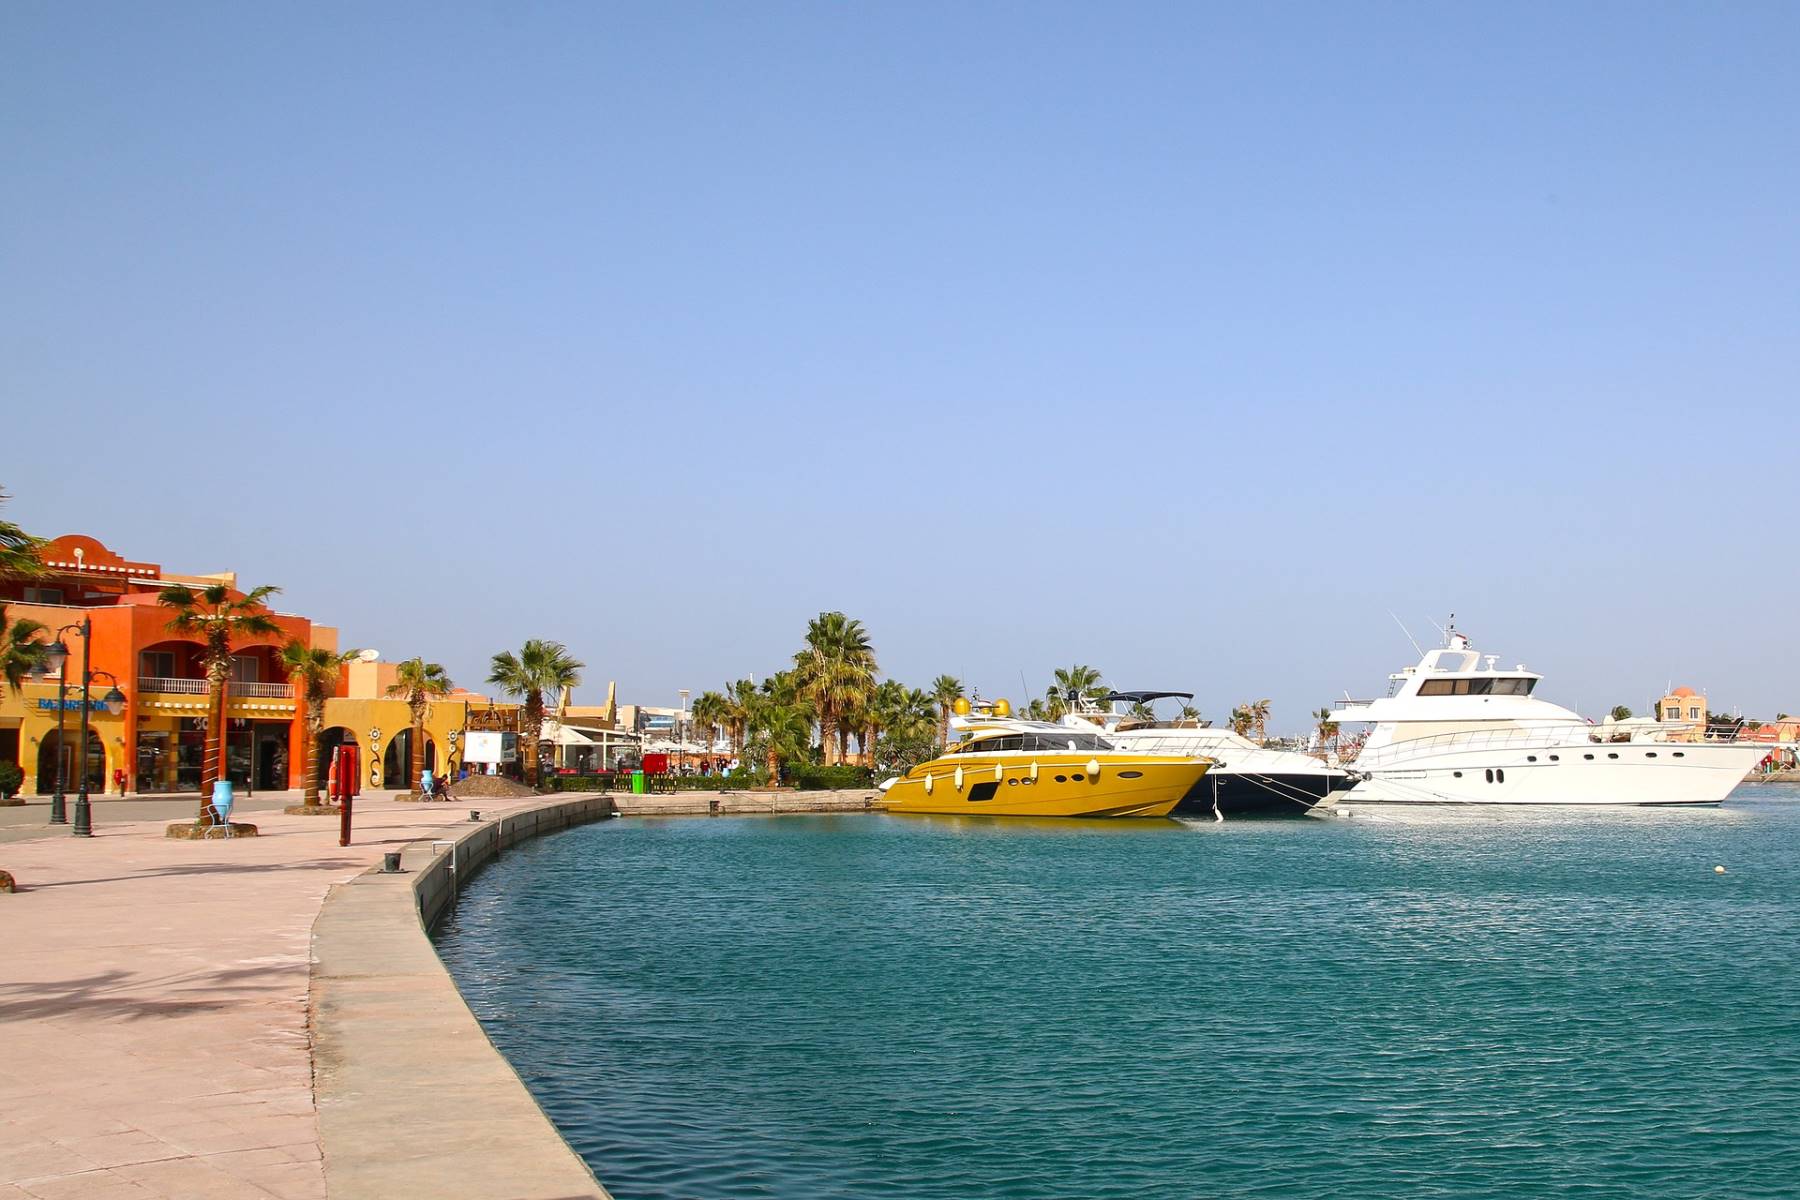 14 Best Things to Do in Hurghada - Marina - Endless Travel Destinations